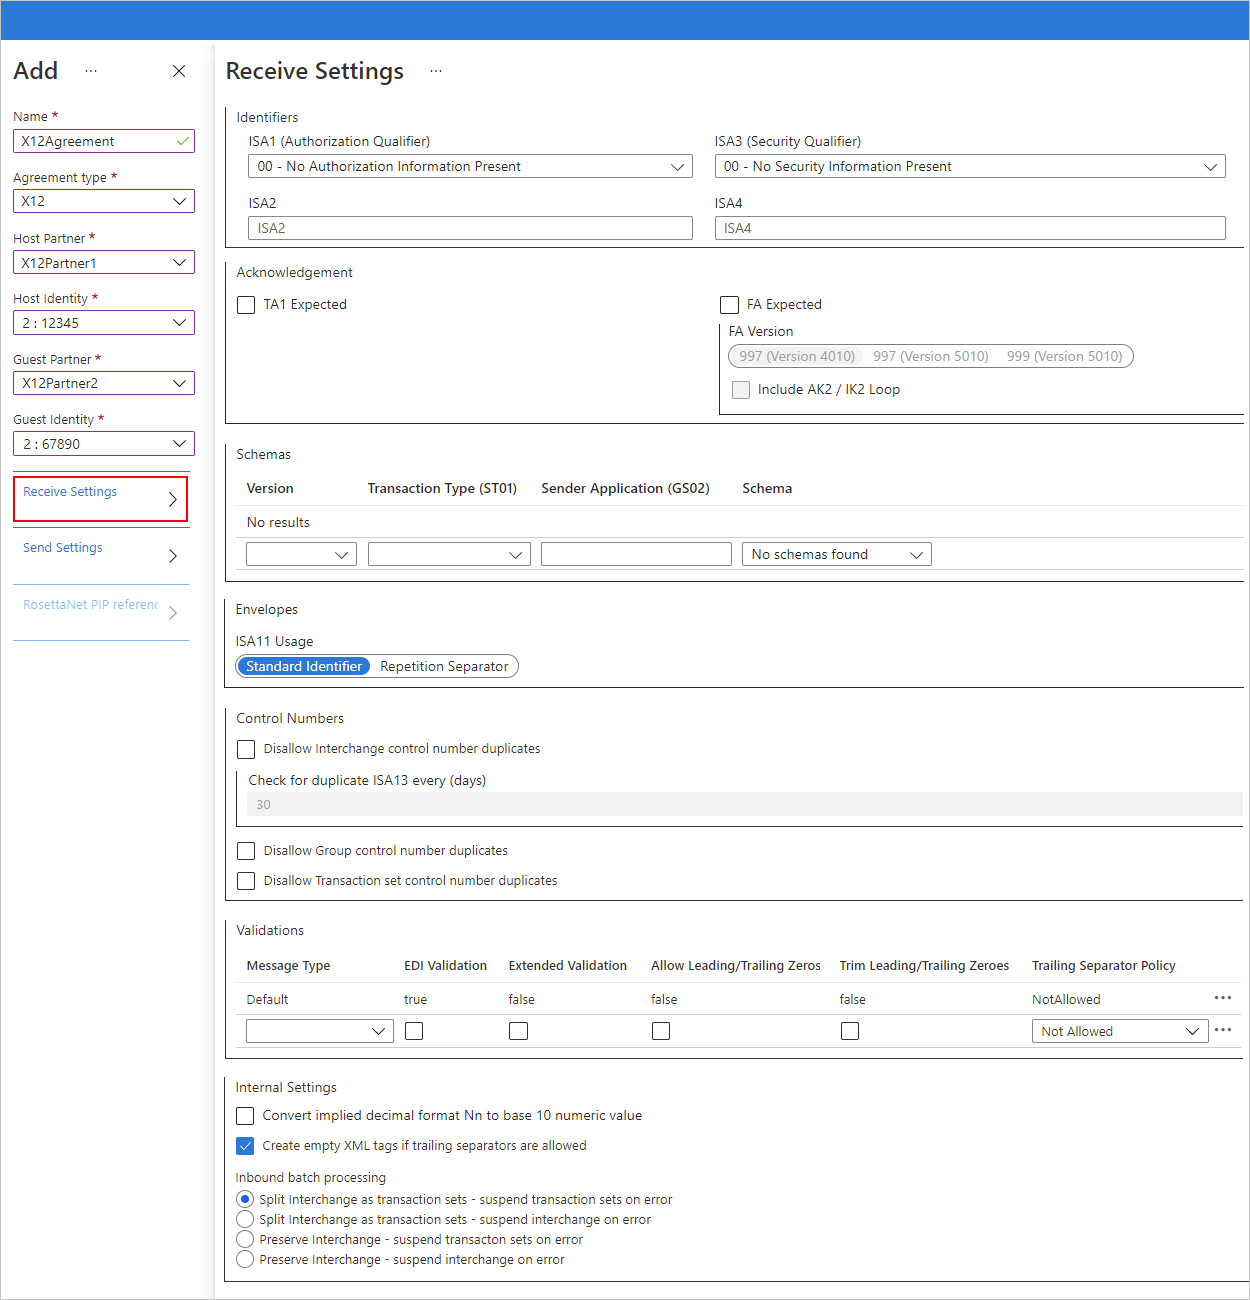 Screenshot showing Azure portal and X12 agreement settings for inbound messages.